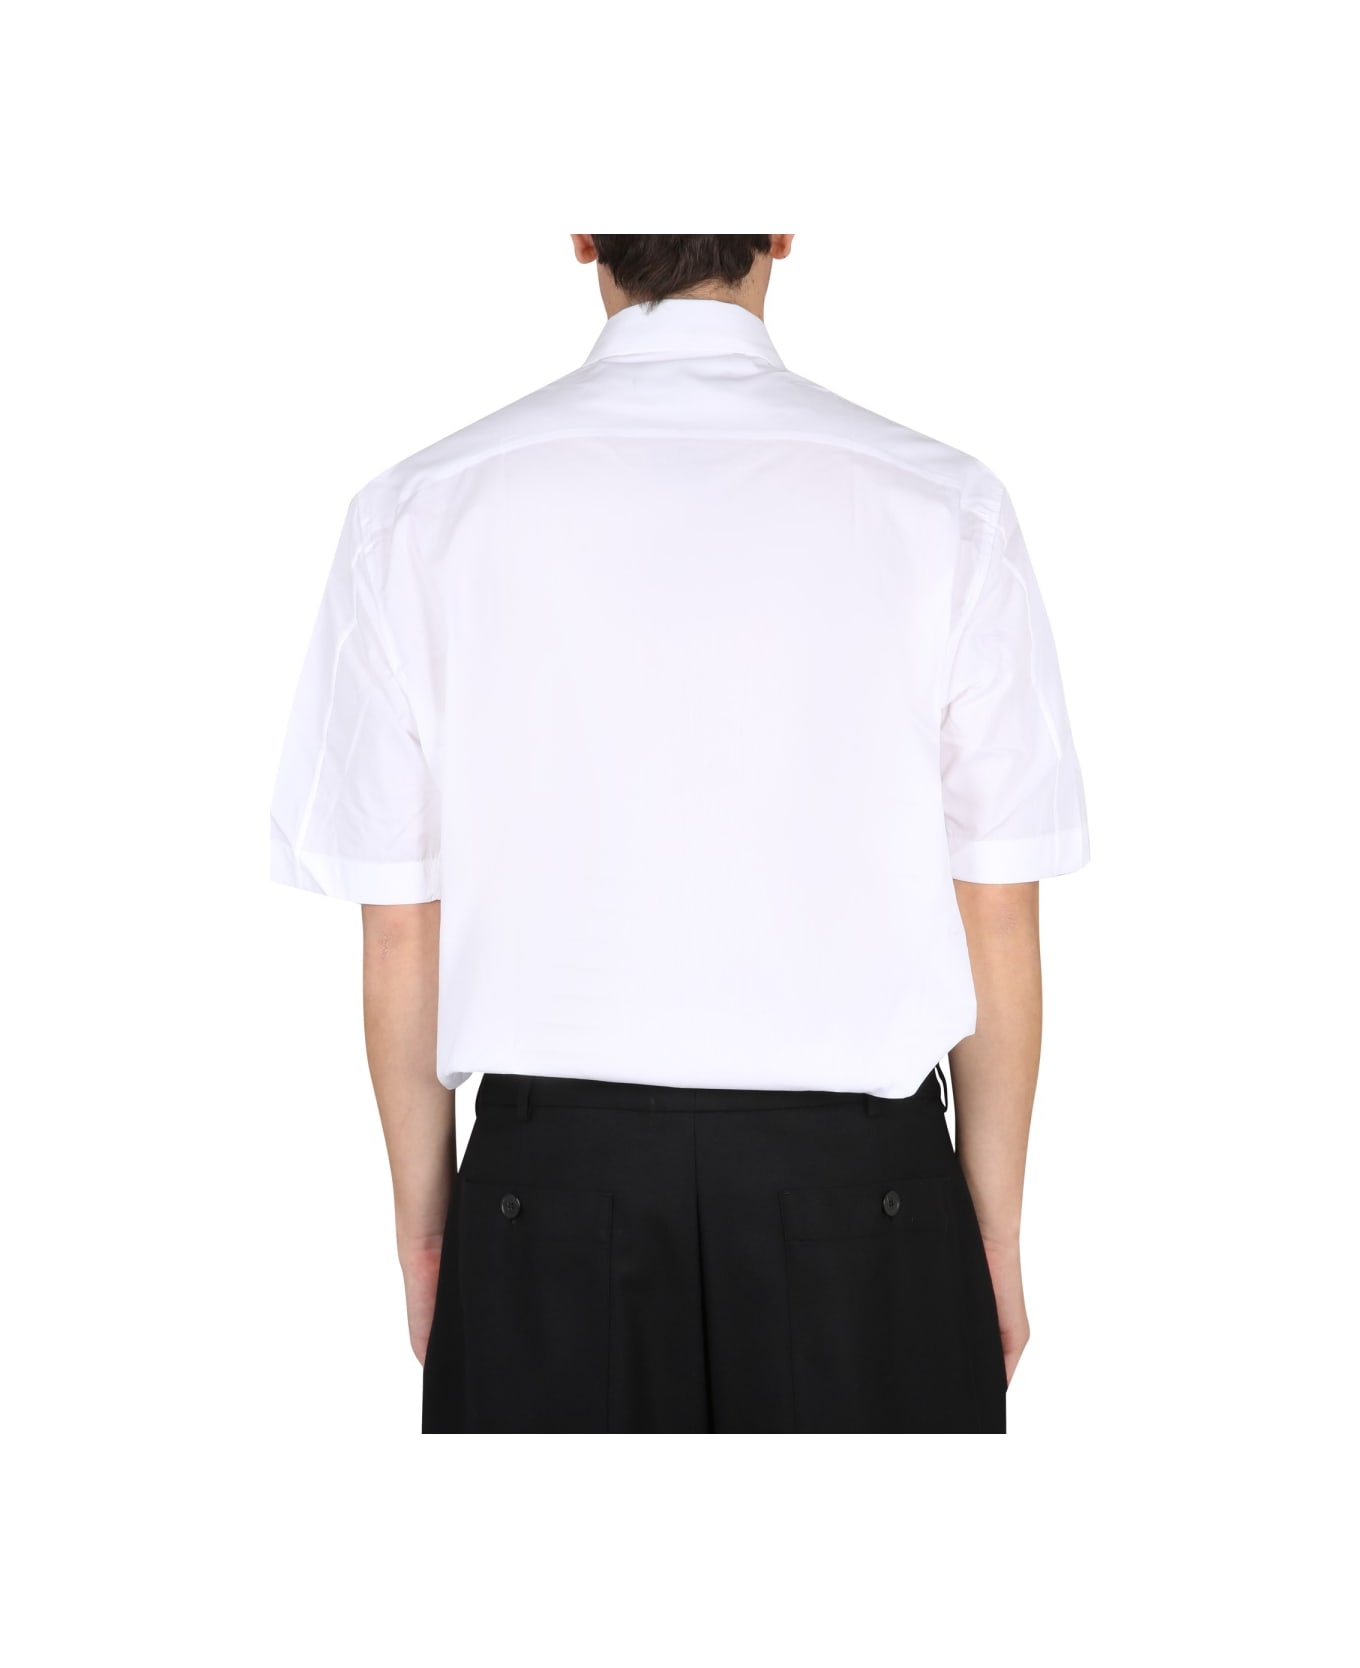 Fred Perry by Raf Simons Shirt With Patch - WHITE シャツ